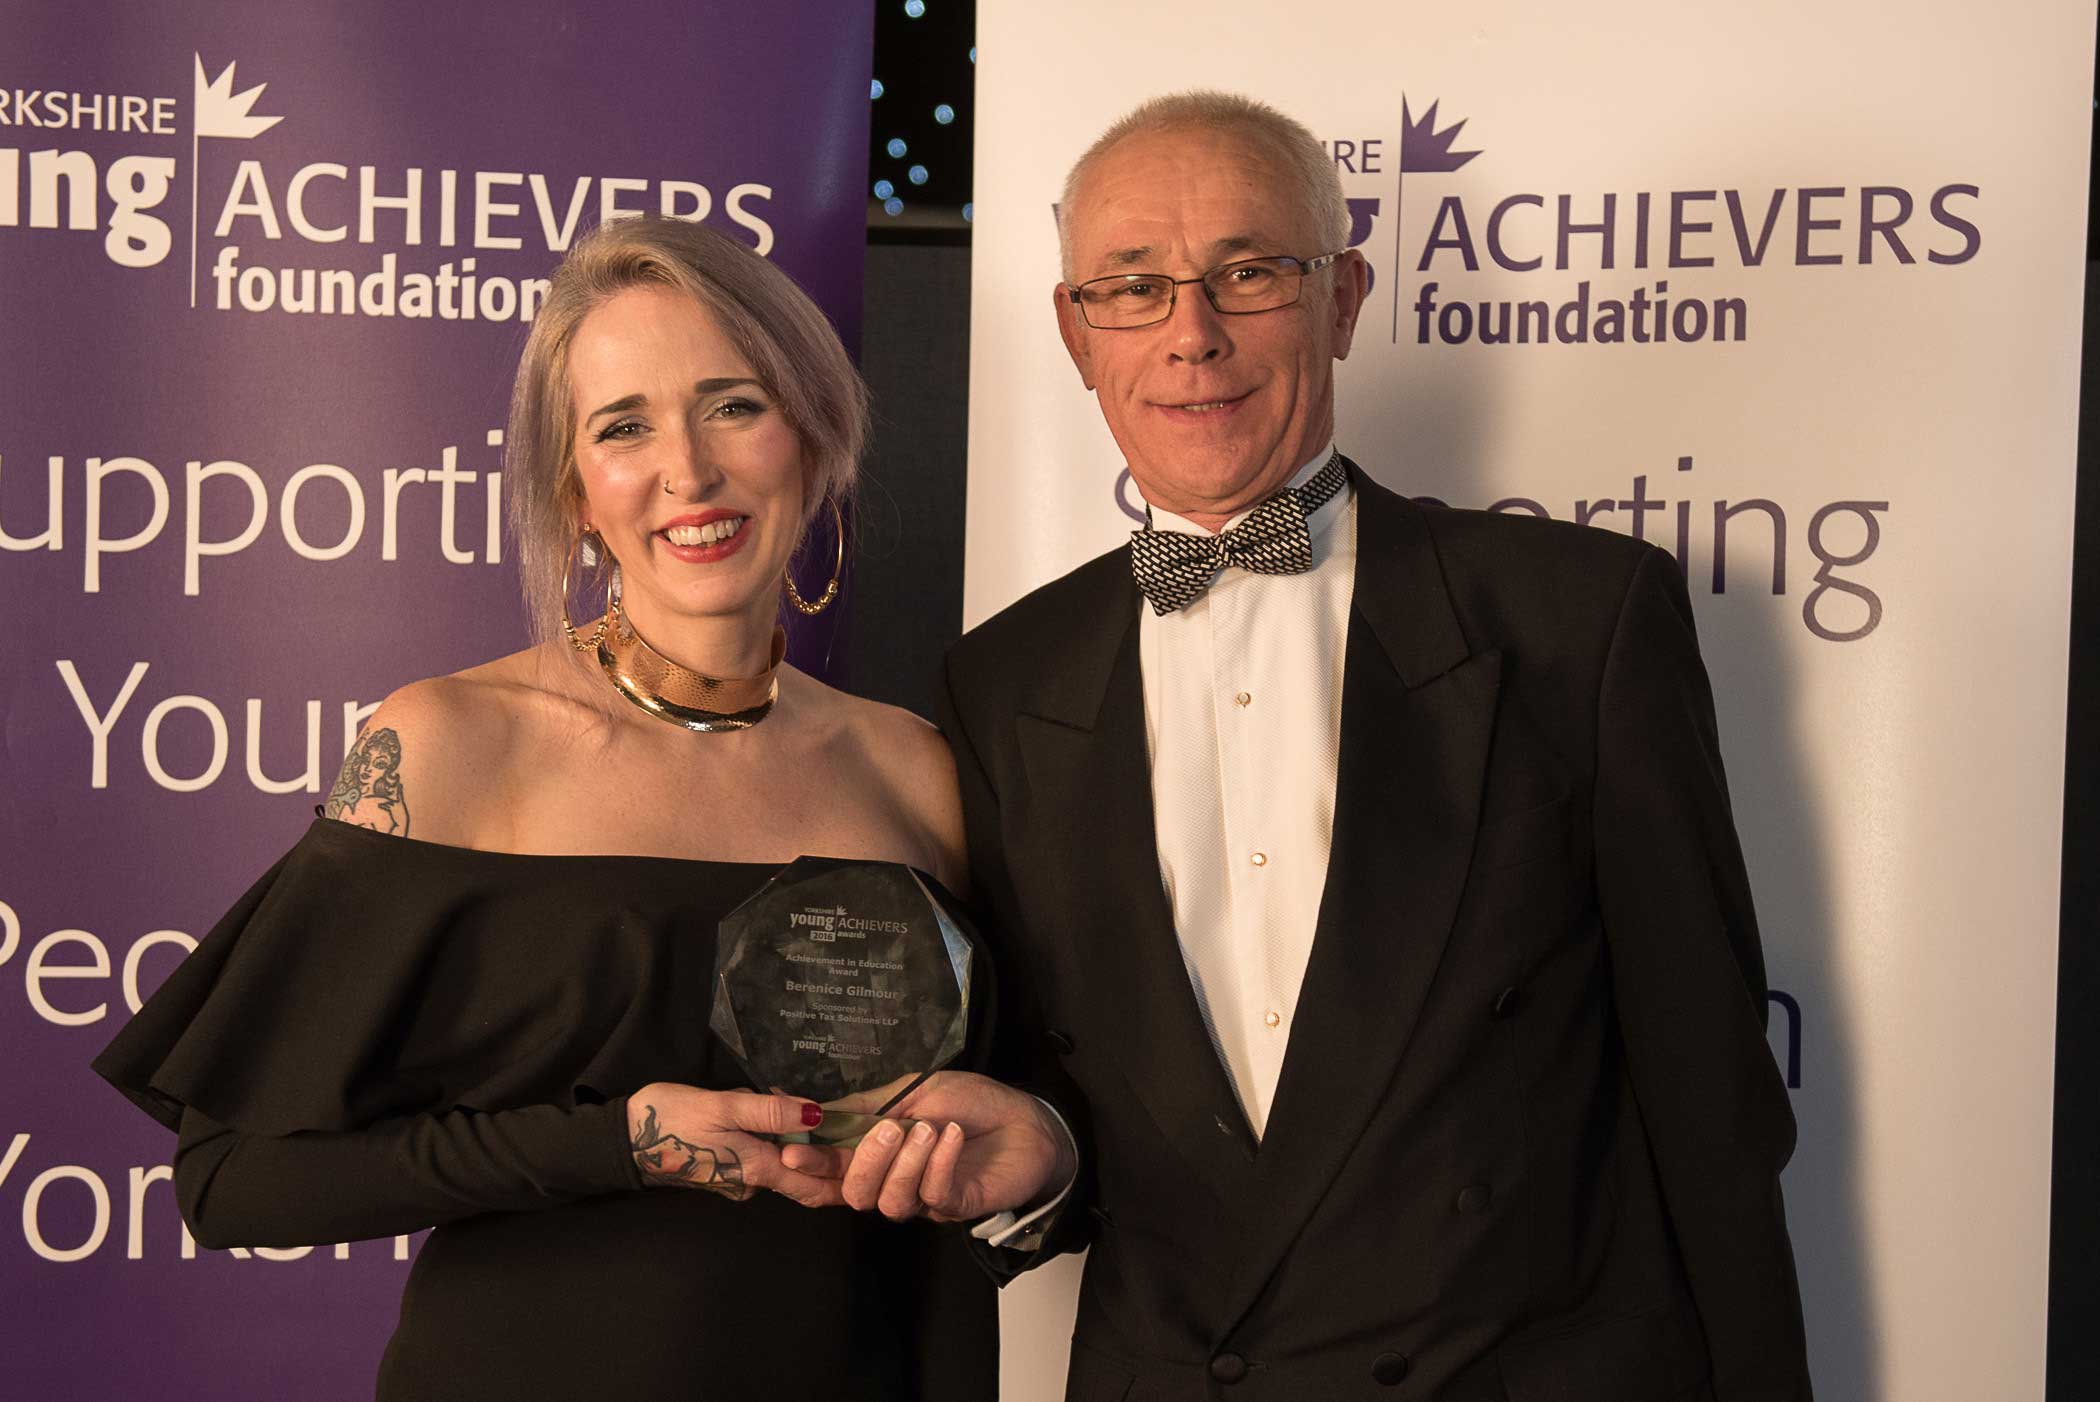 Berenice Gilmour receives the Achievement in Education Award from sponsor Stephen Burwood of Positive Tax Solutions